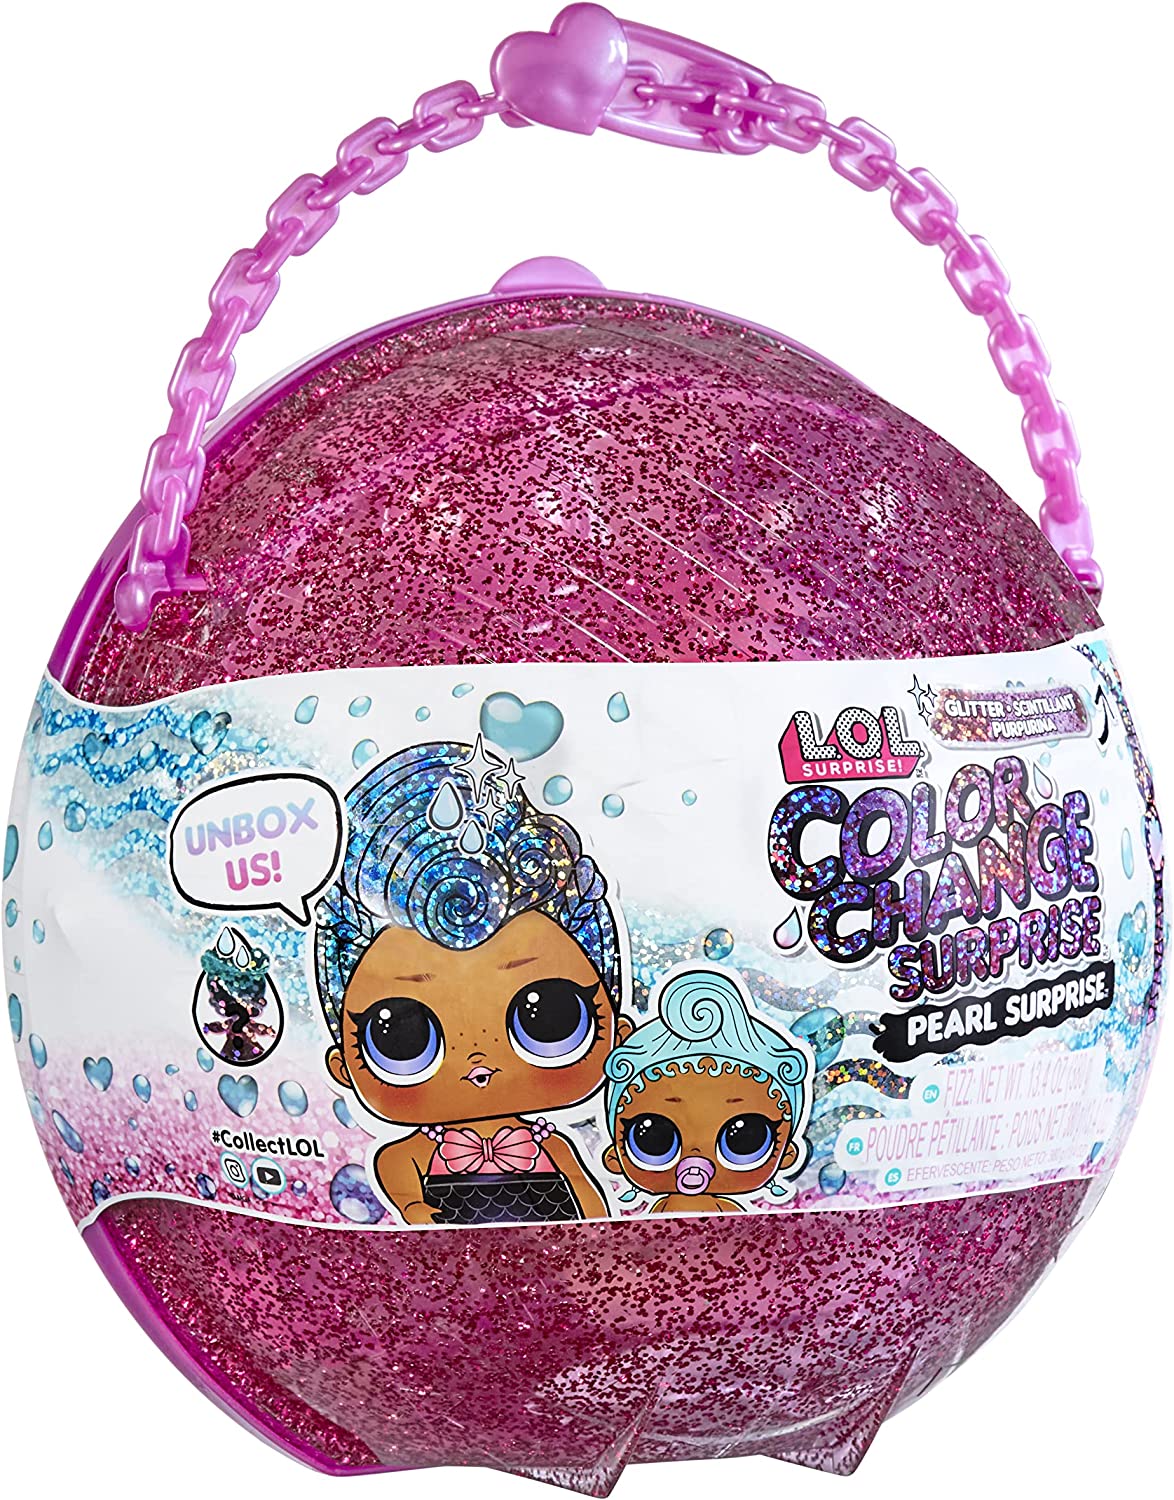 LOL Surprise Glitter Color Change Pearl Surprise (Purple) with 6 Surprises- Exclusive Collectible Doll & Lil Sister in Interactive Playset, Holiday Toy, Great Gift for Kids Ages 4 5 6+ Years Old